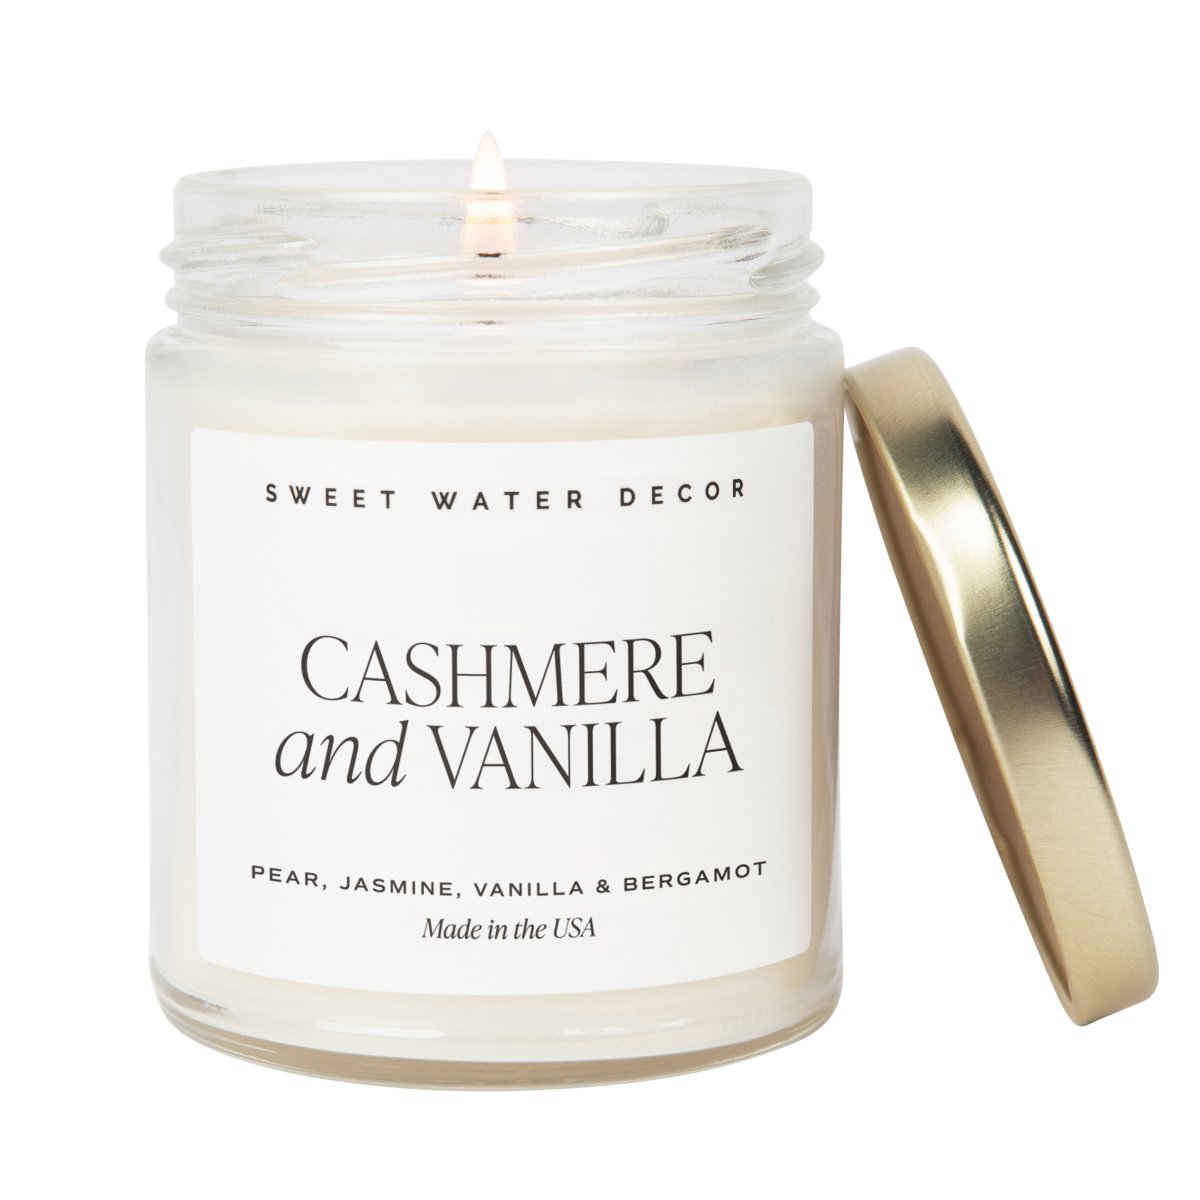 Sweet Water Decor Cashmere and Vanilla Soy Candle - Clear Jar - 9 oz - lily & onyx